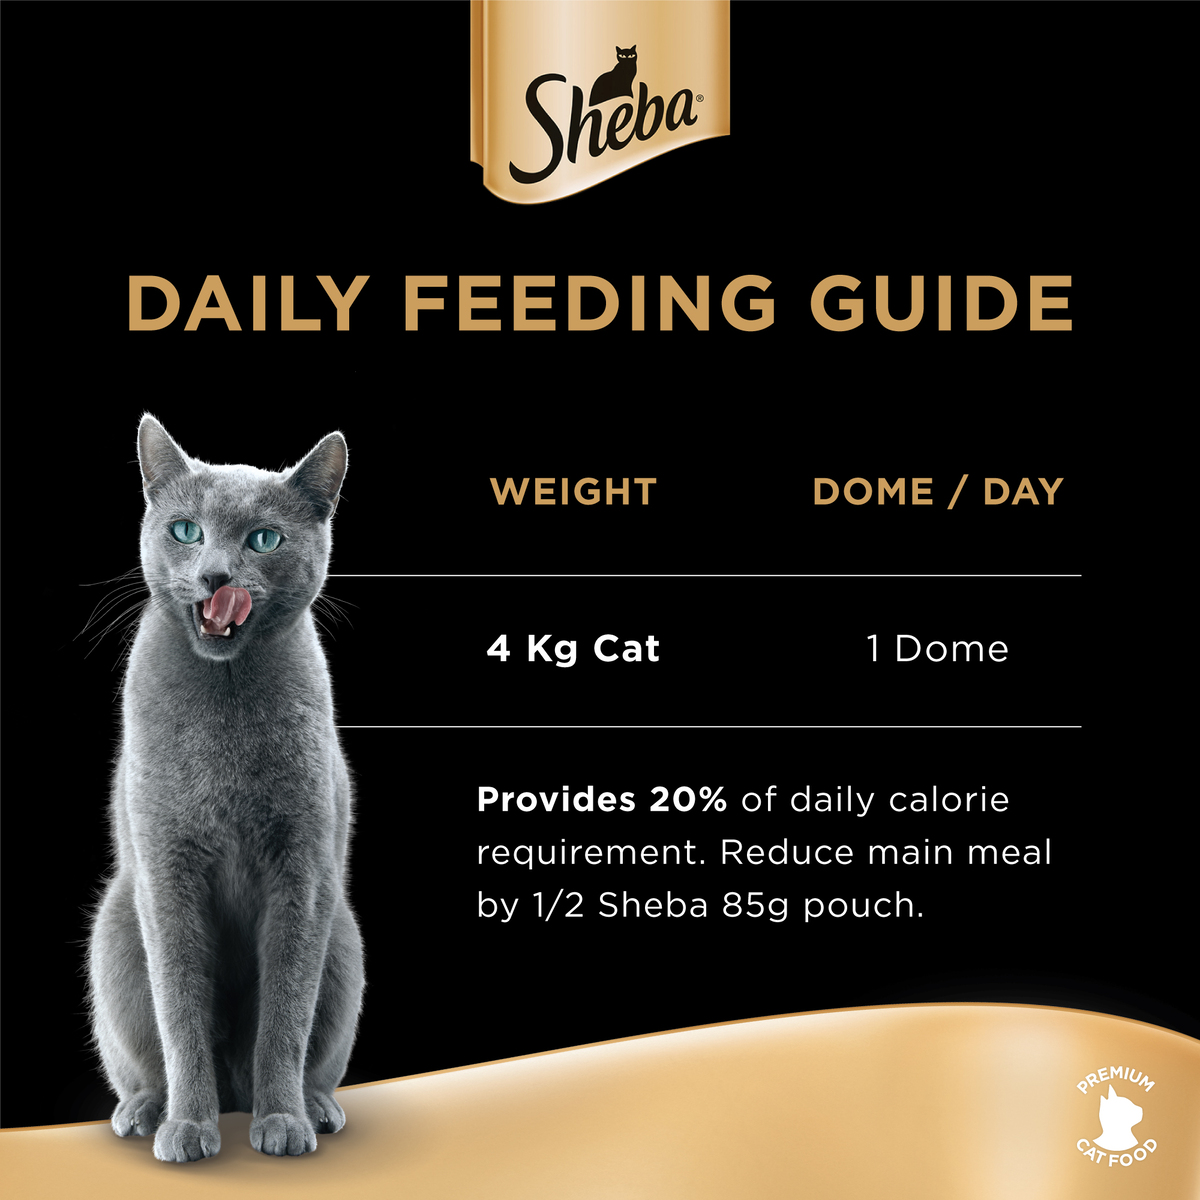 Sheba Fillets Chicken With Shrimp And Tuna Cat Food 60 g